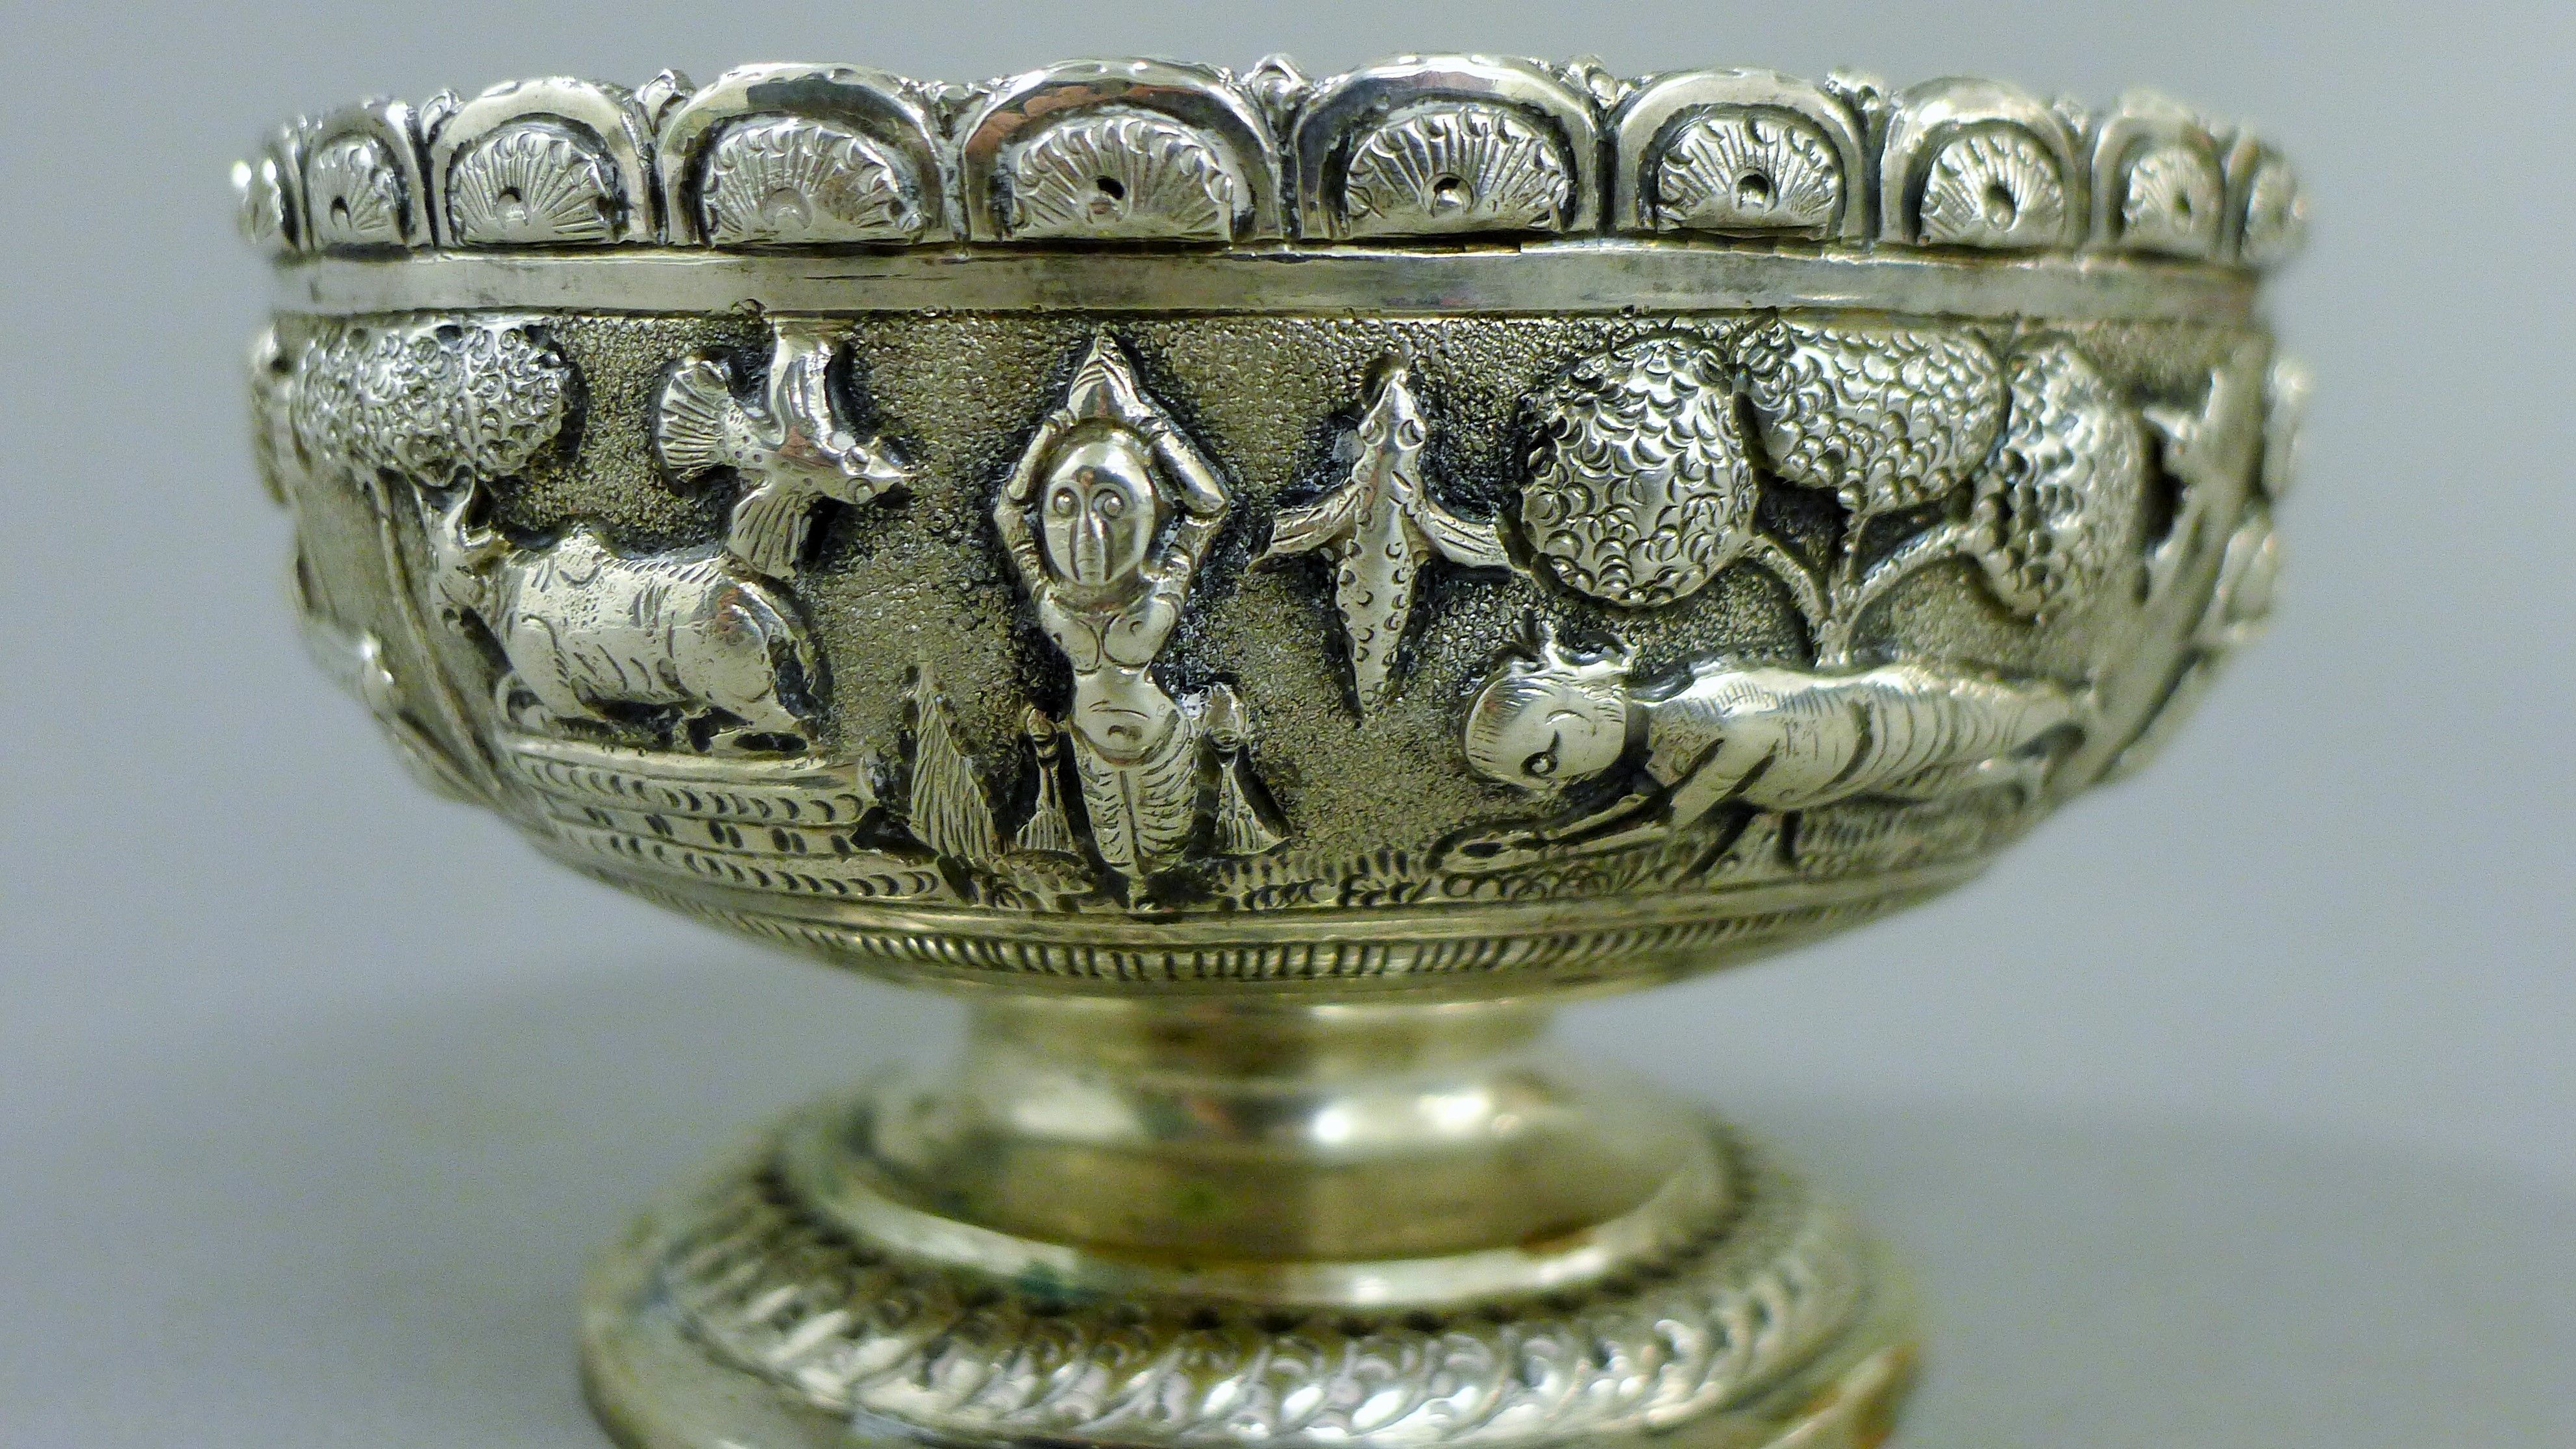 An Indian silver bowl with repousse decoration of rural scenery. 10 cm diameter. 85.9 grammes. - Image 4 of 5